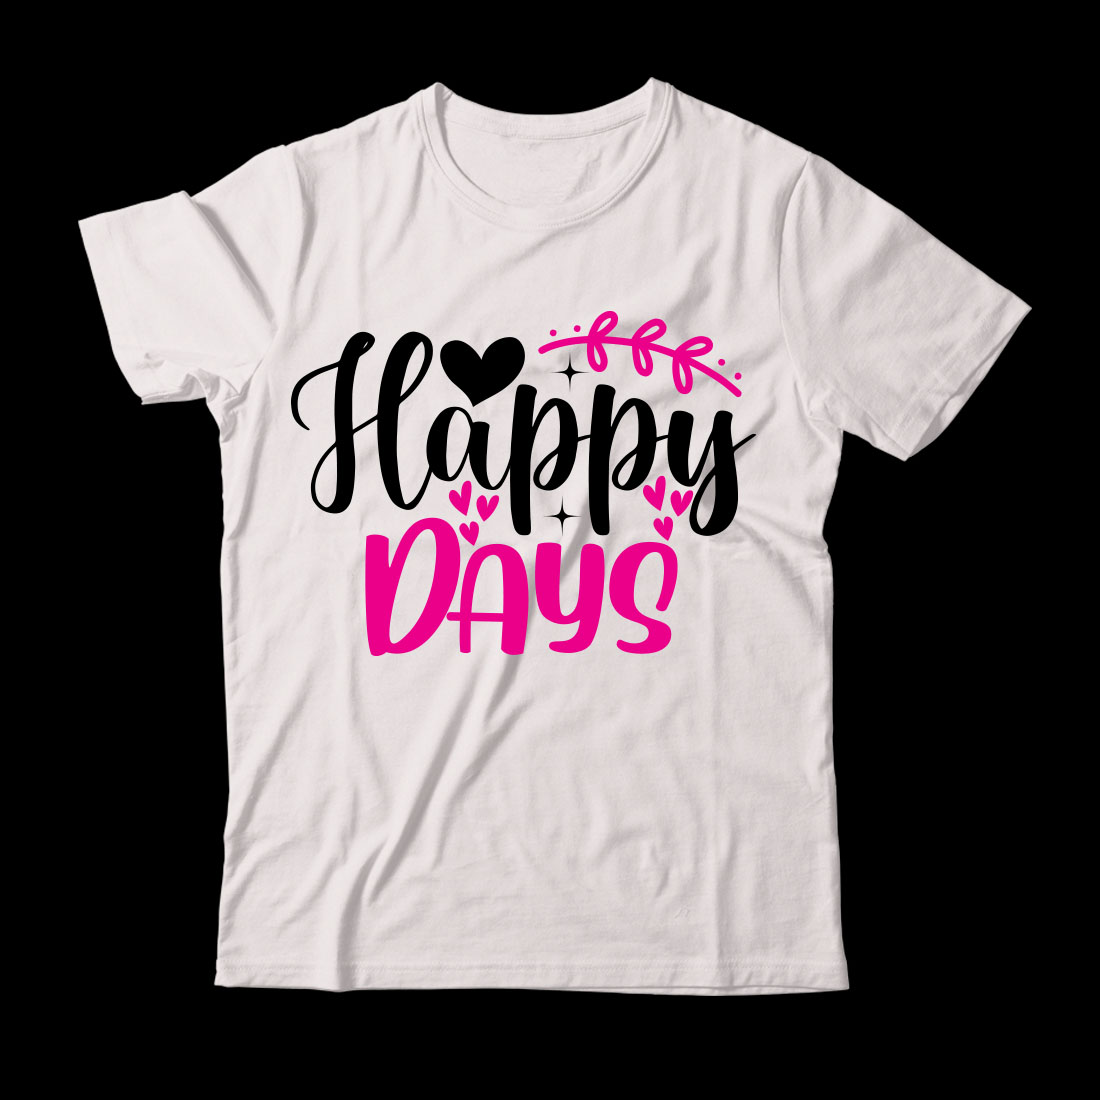 White t - shirt with the words happy days printed on it.